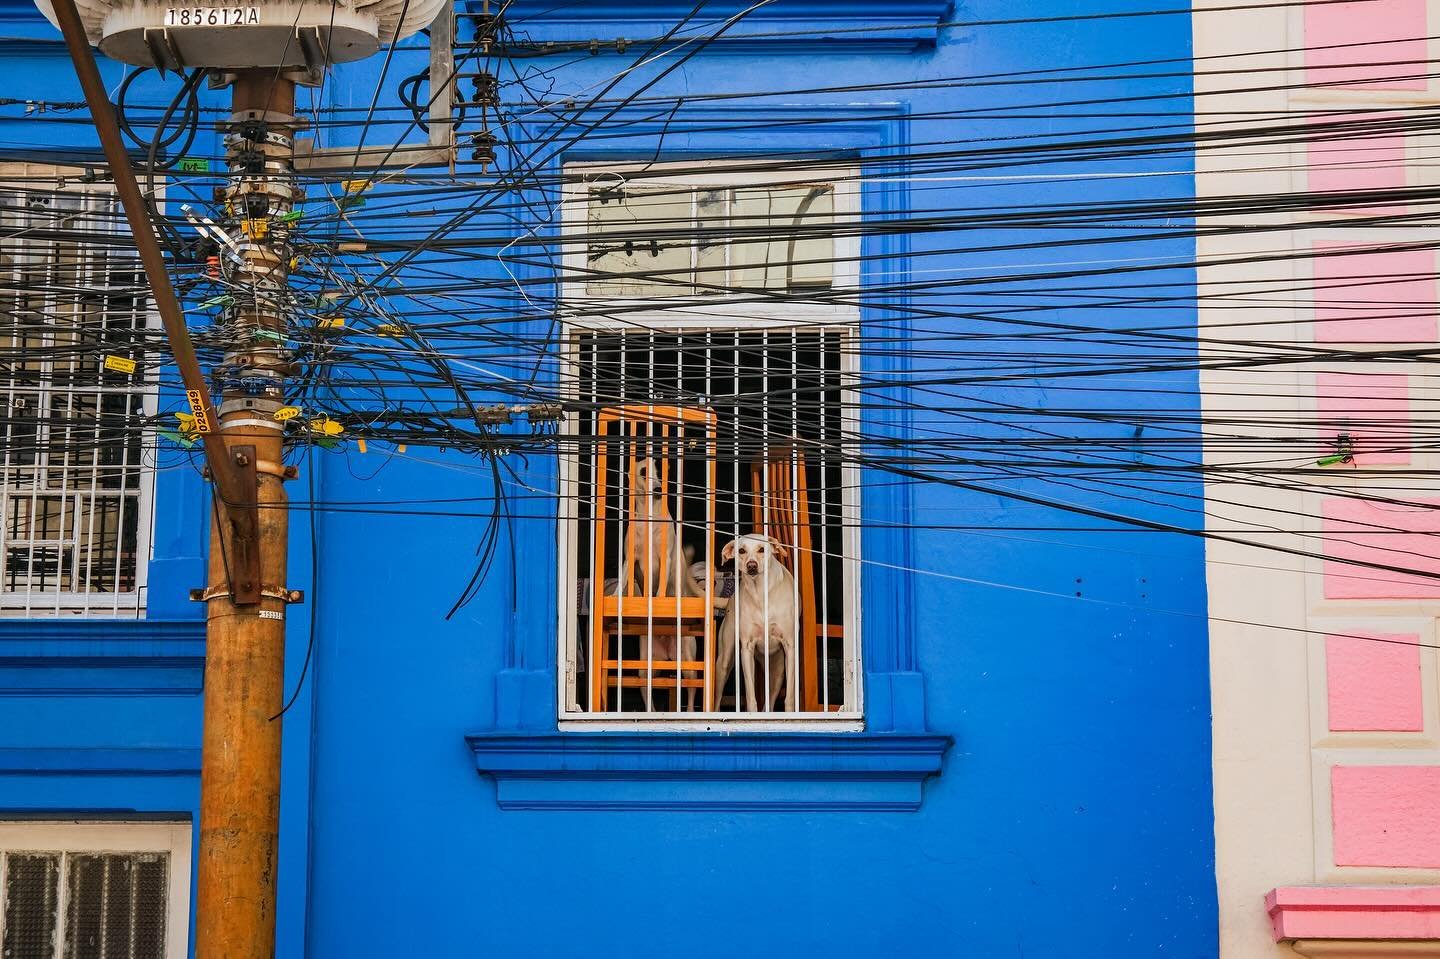 Dogs. Porto Alegre, September 2023. 

See my two previous posts and check out my linktree in bio for the upcoming exhibition. 

Have you ever been to Brazil or is it somewhere you&rsquo;re hoping to visit some day? 

#portoalegre #brazilcanada #brazi